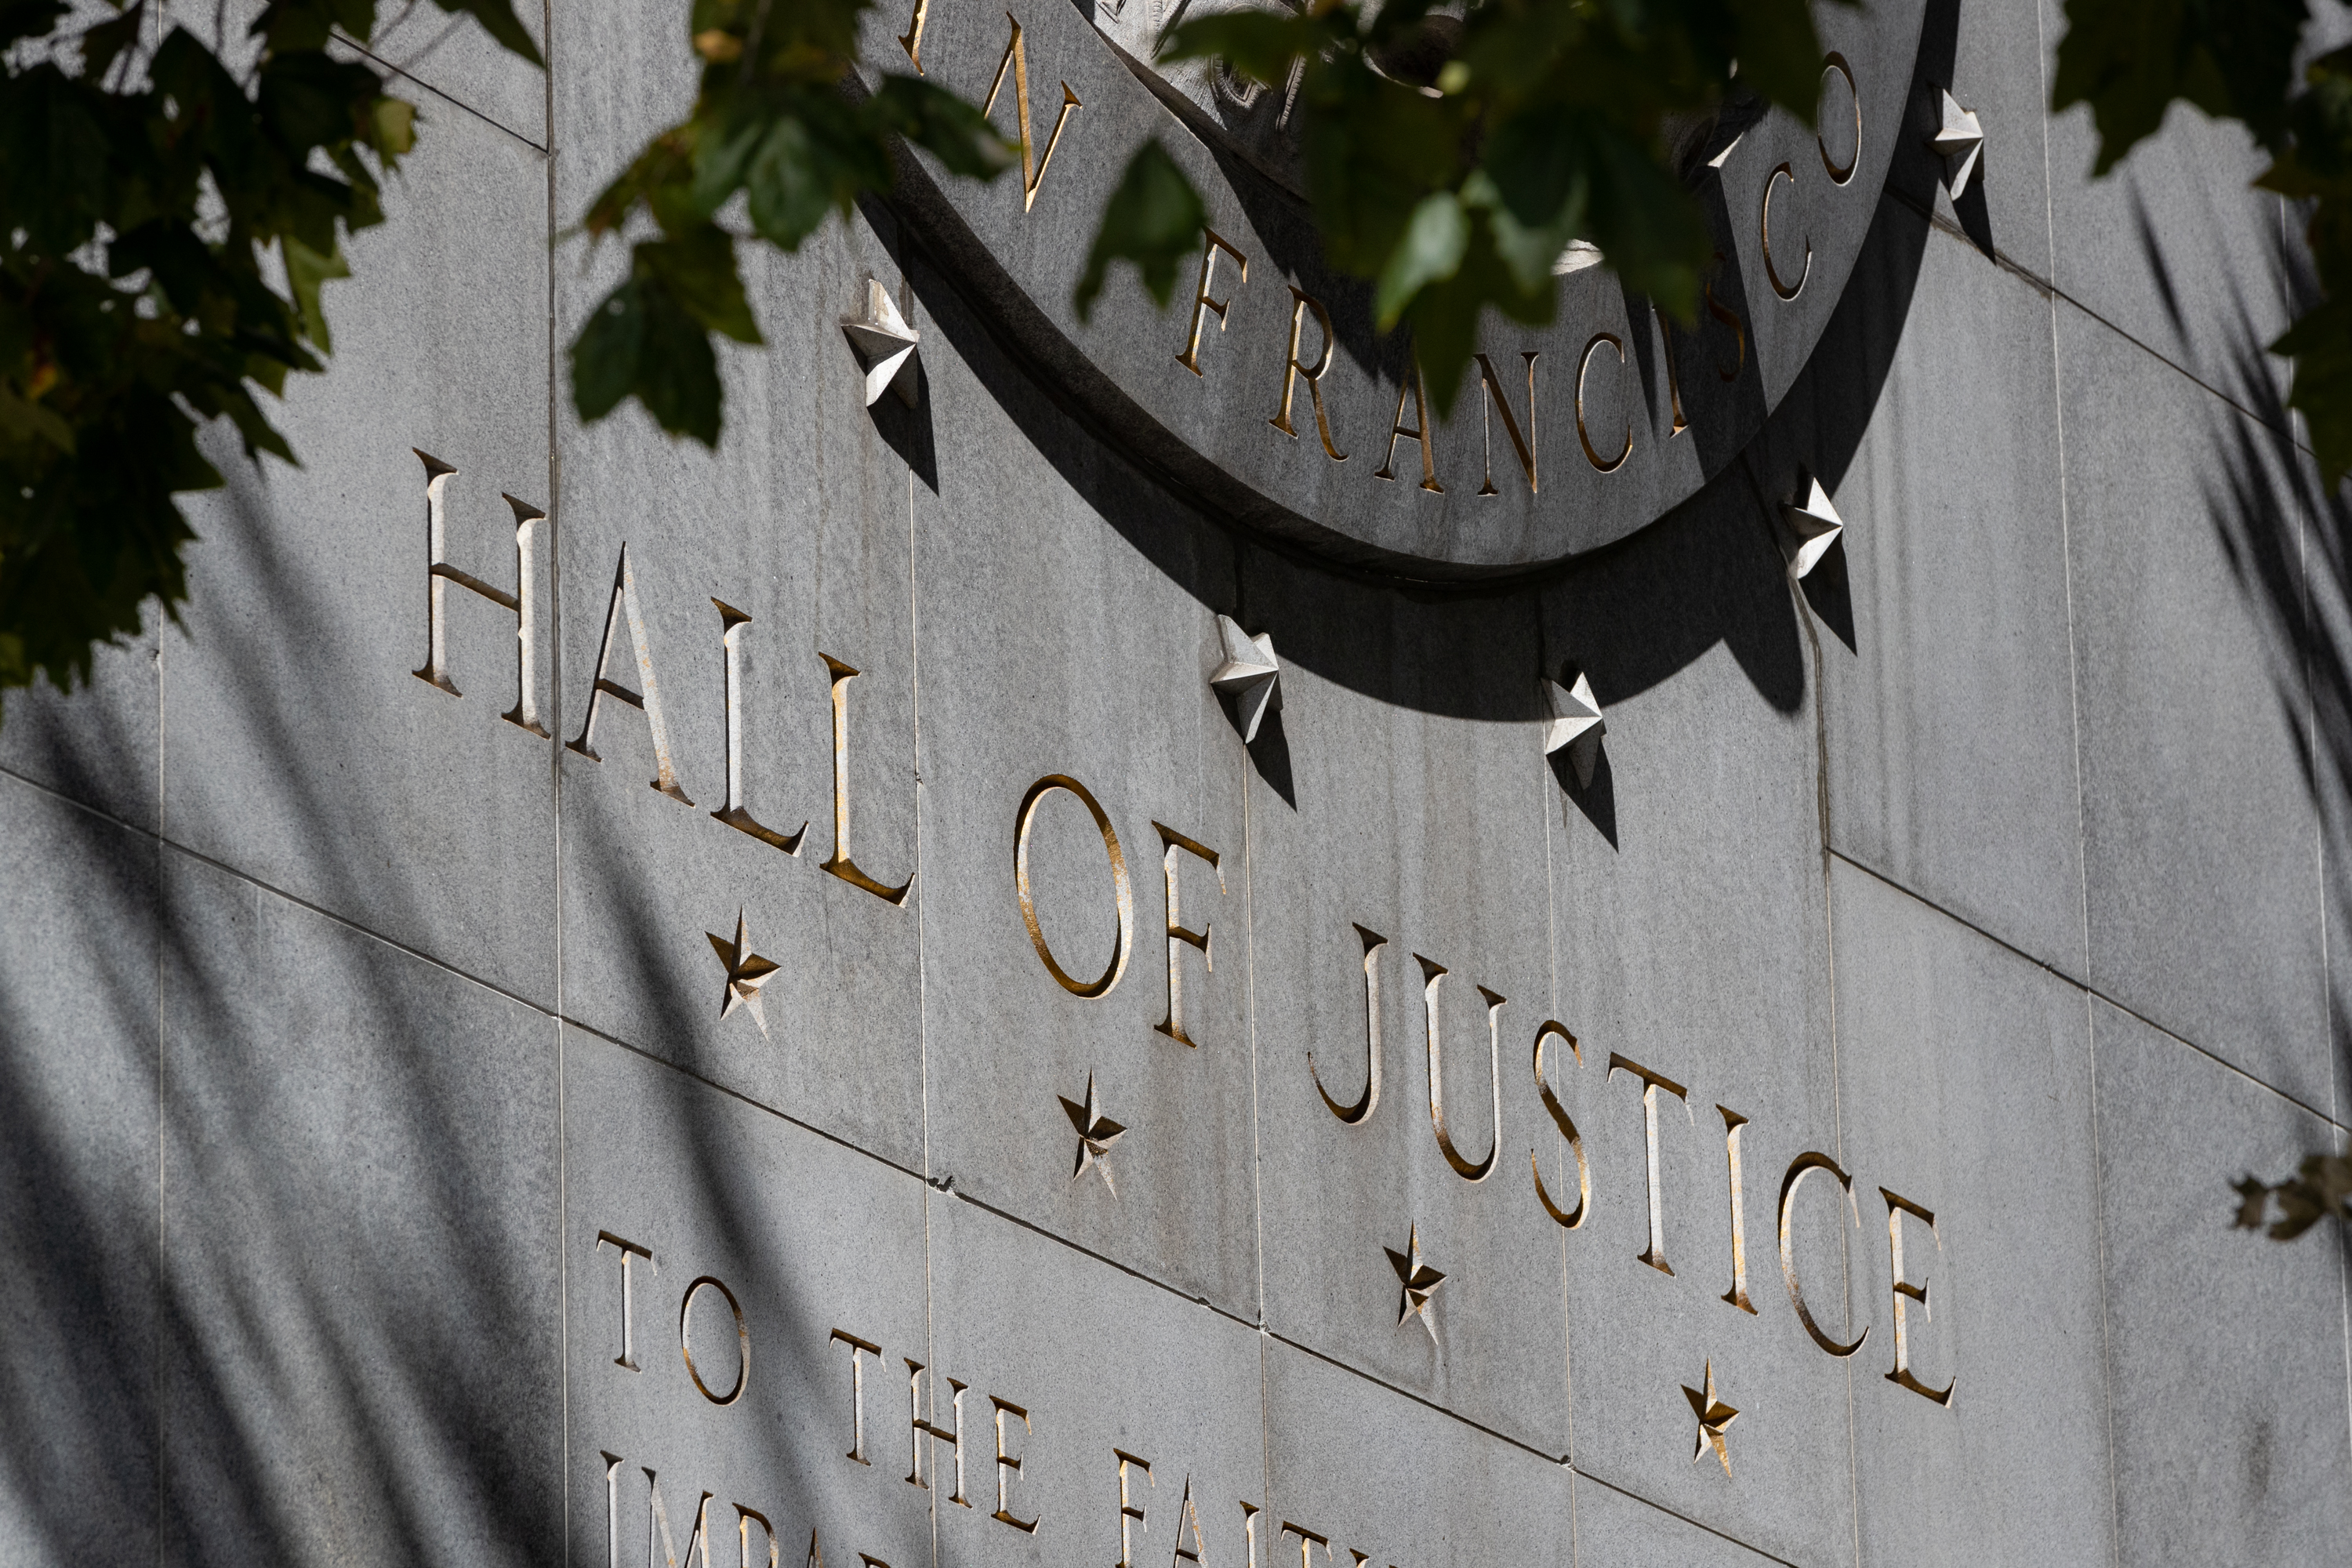 A sunlit stone wall with "HALL OF JUSTICE" engraved, adorned with stars, shadow of a tree's leaves visible.